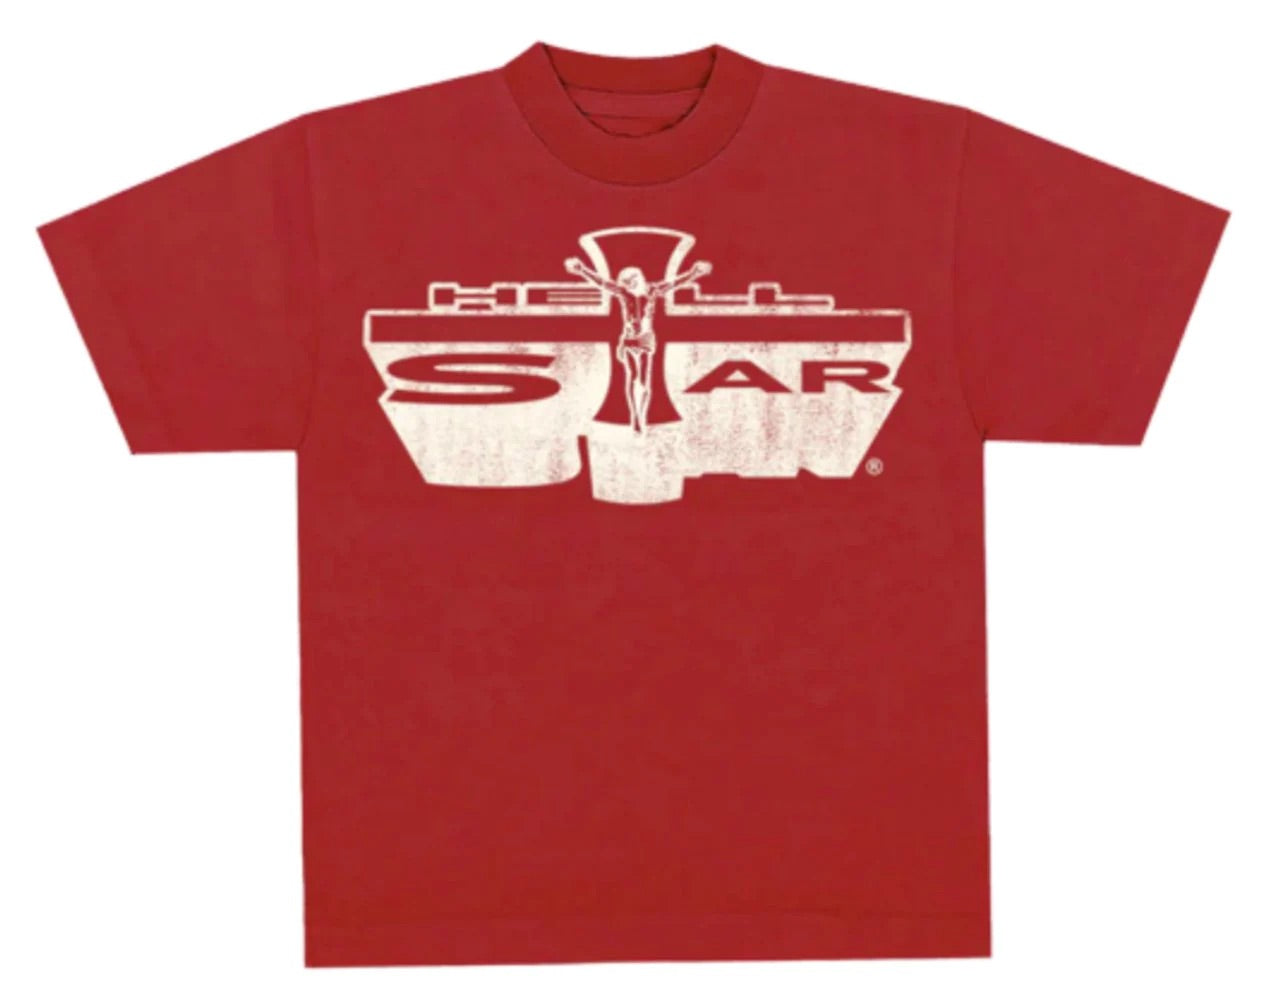 HELL STAR WASHED EMBLEM TEE RED